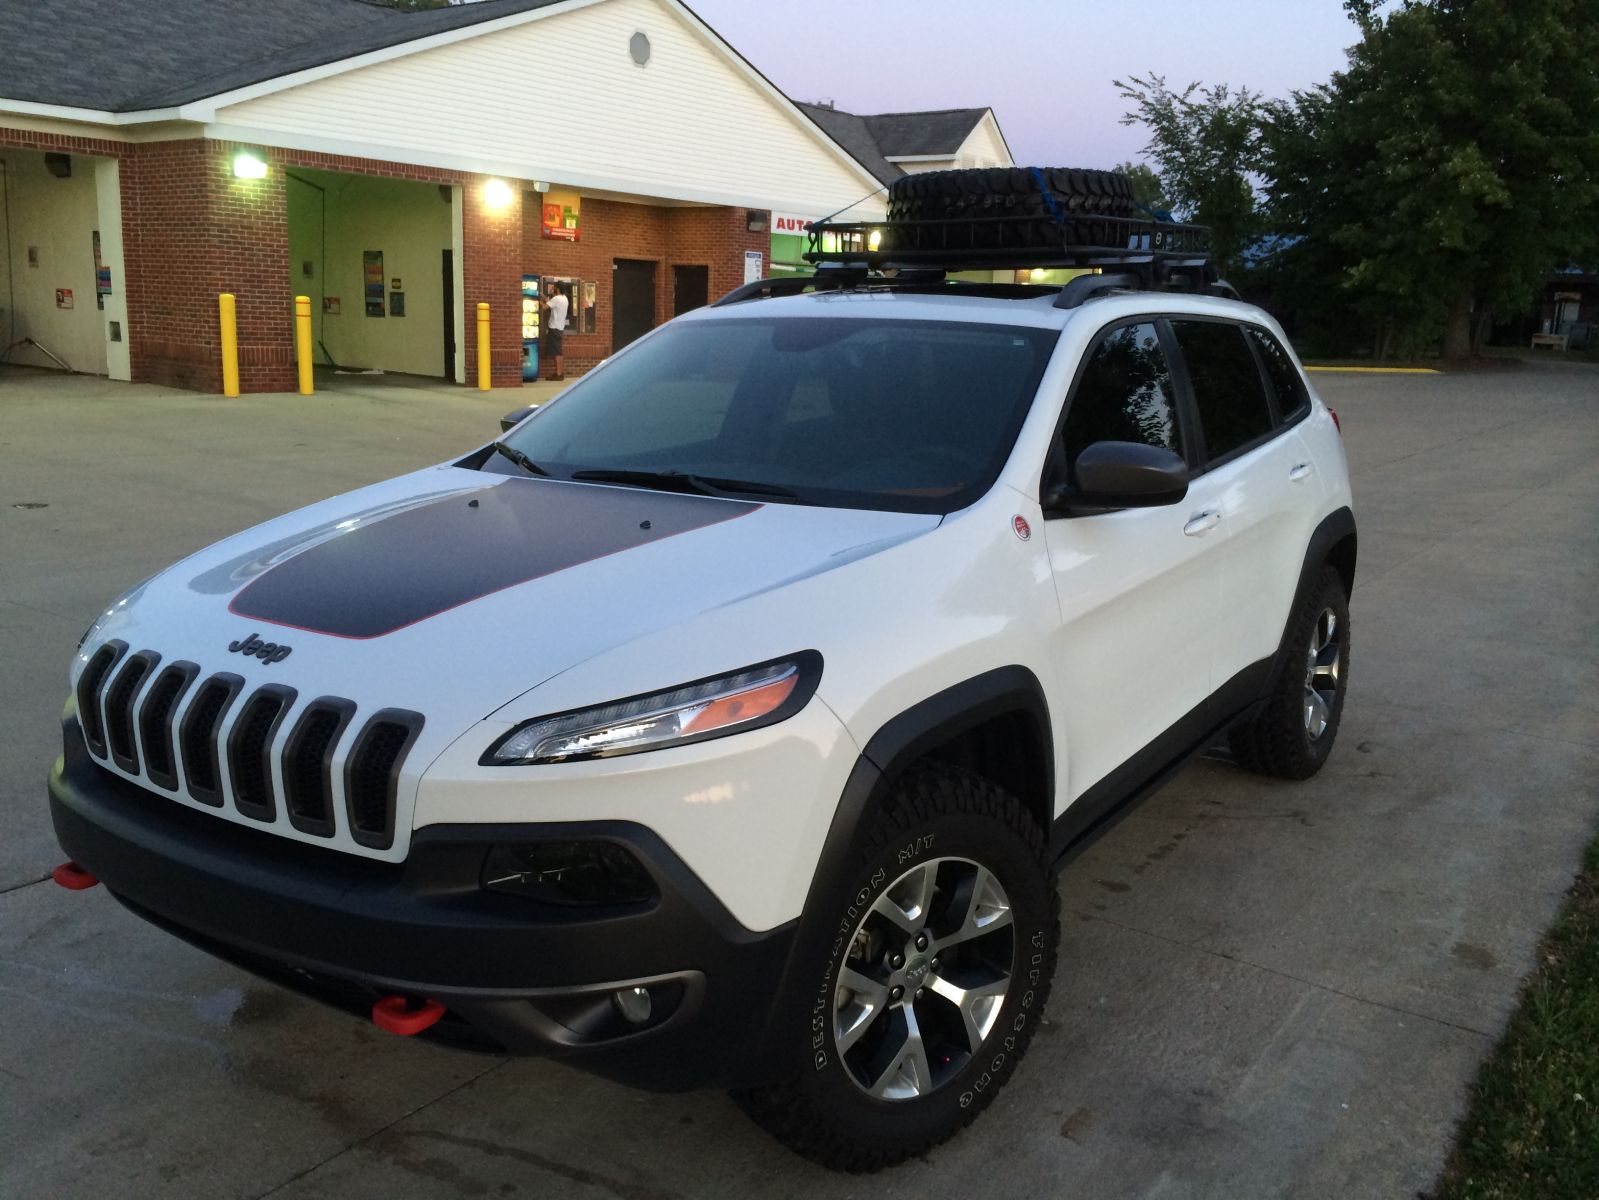 trailhawk with badges removed